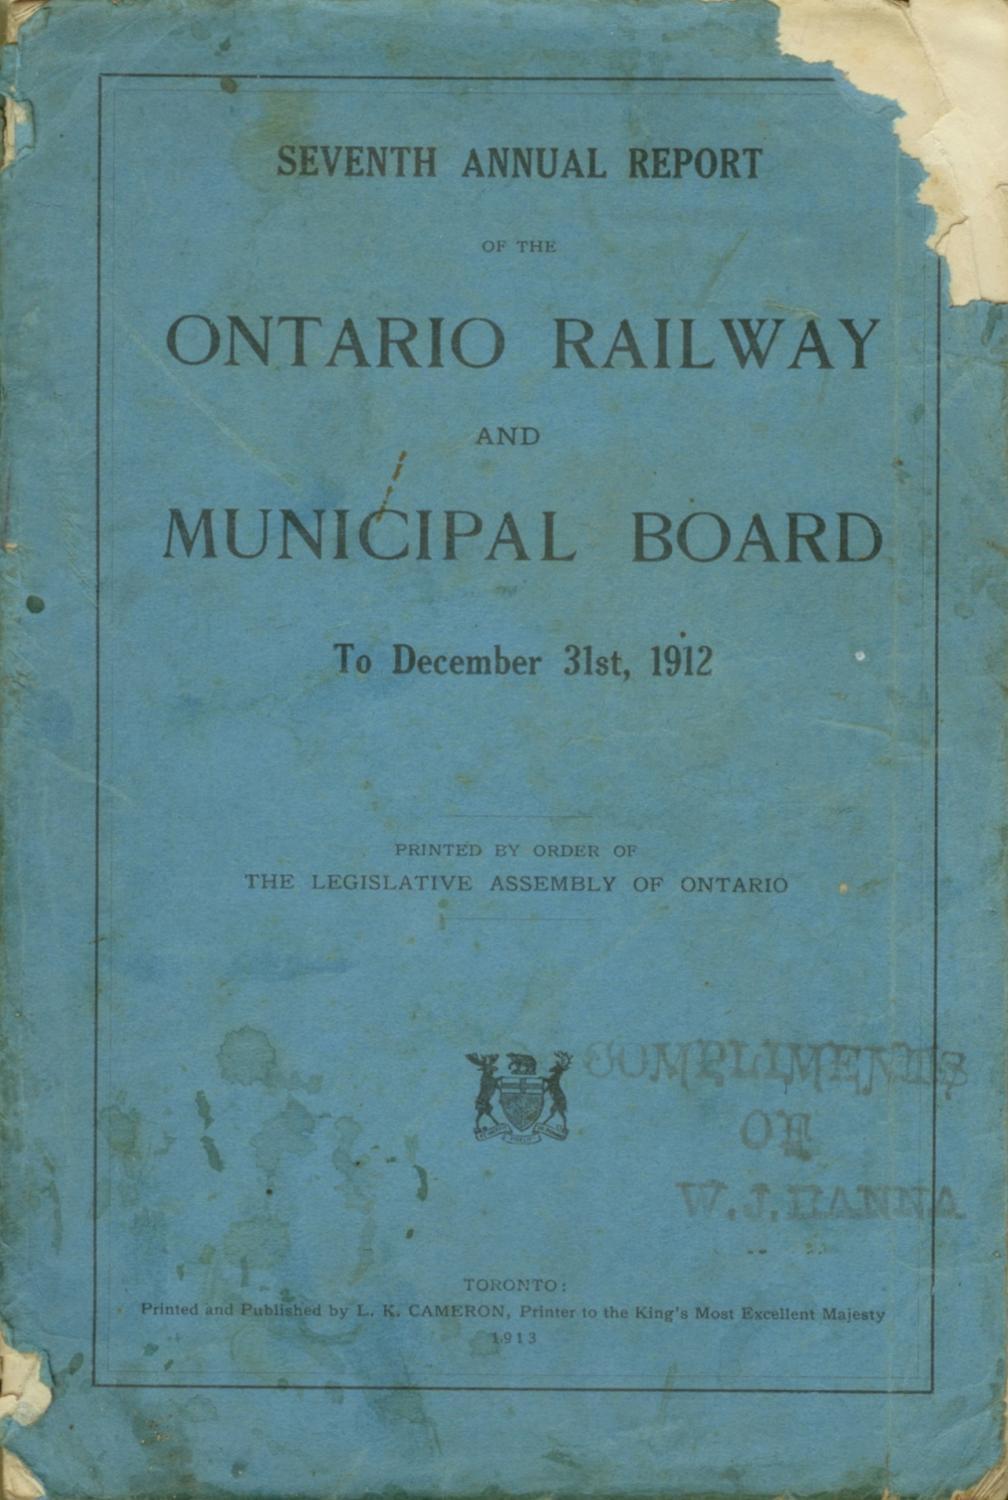 Seventh Annual Report of the Ontario Railway and Municipal Board To December 31st, 1912